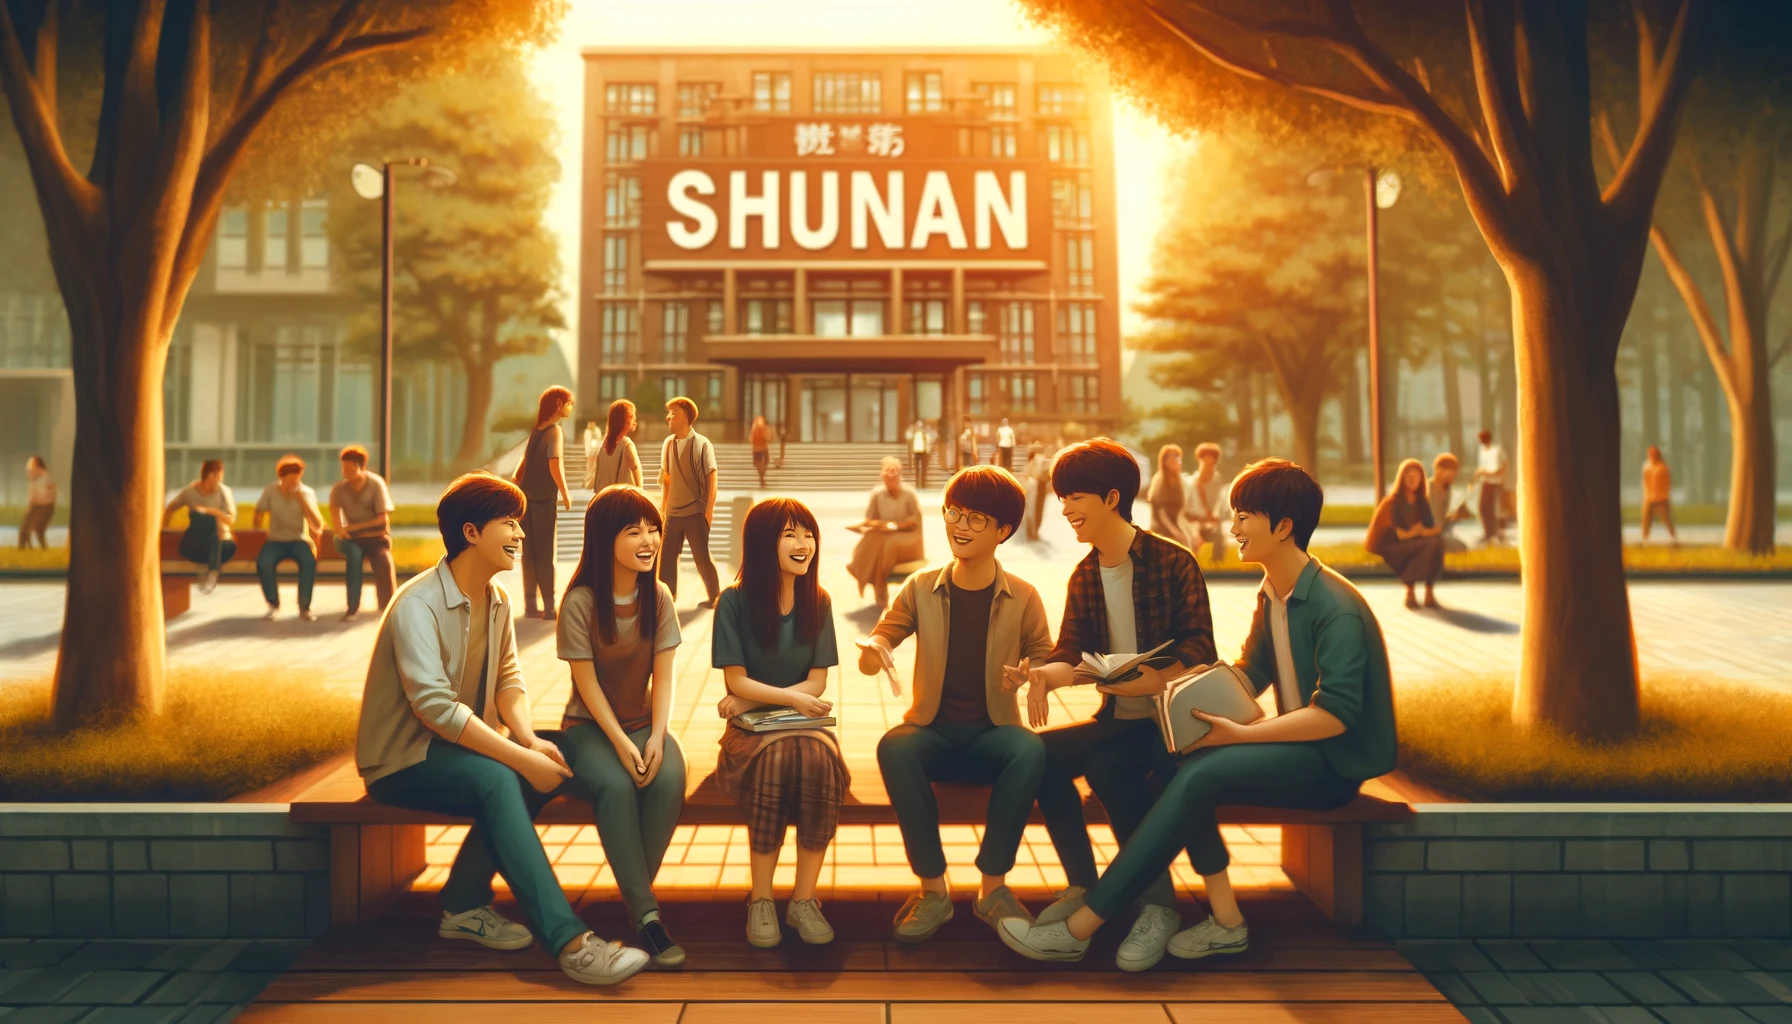 A warm and inviting scene at Shunan Public University featuring students engaged in a cheerful conversation. The image captures a small group of students from diverse backgrounds, sitting together on campus benches, laughing and talking. The setting is relaxed with trees and the university's buildings in the background, creating a lively and inclusive atmosphere. The word 'SHUNAN' is prominently displayed in the scene, symbolizing the university's community spirit and the happiness of its students.